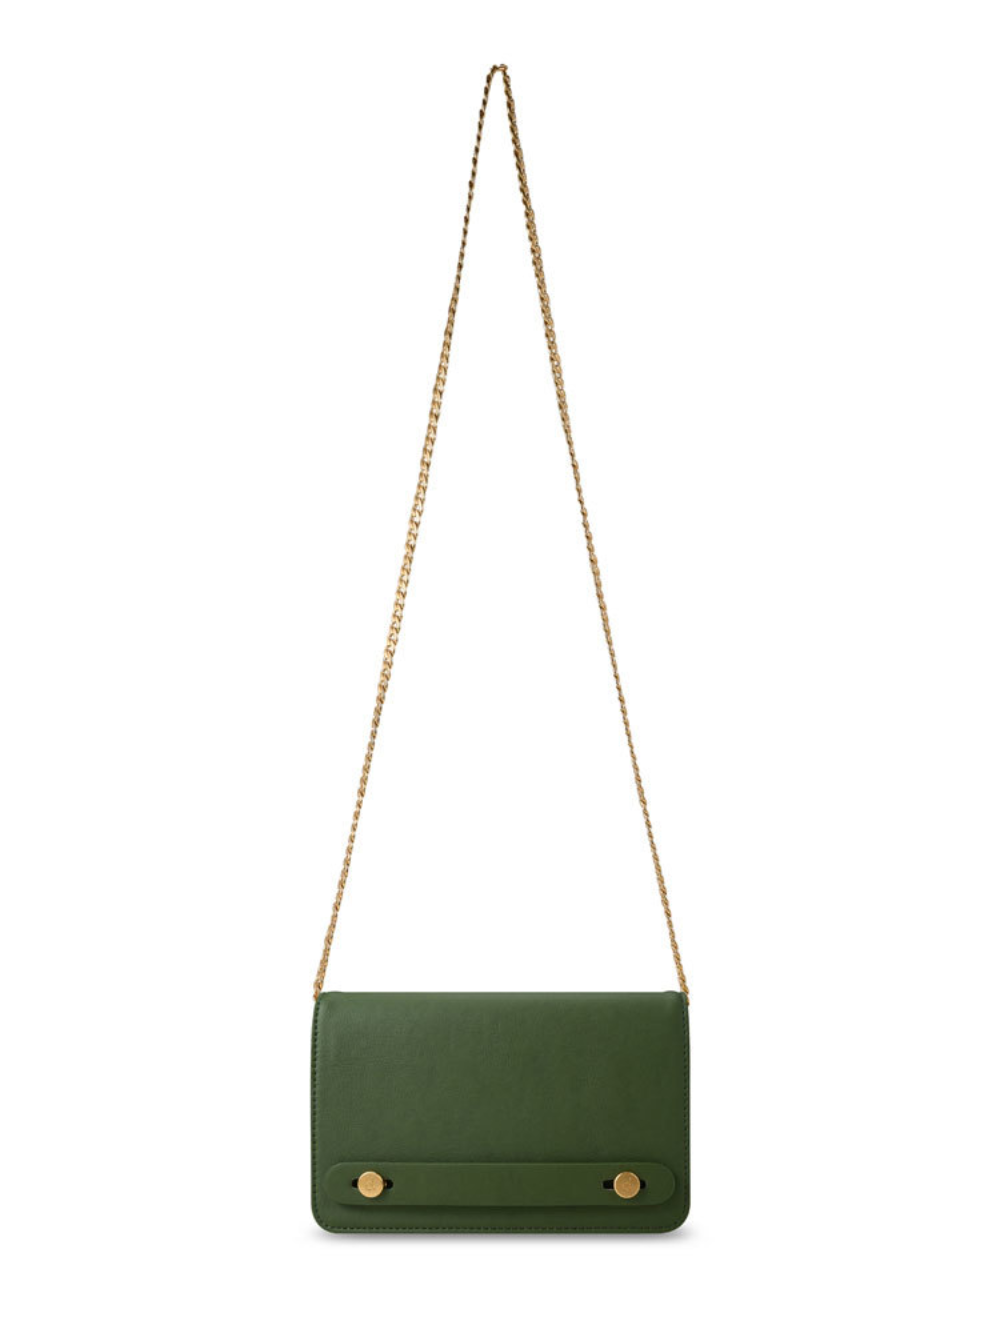 Cactus Leather Gold Chain Clutch Bag, Green(exclusive)